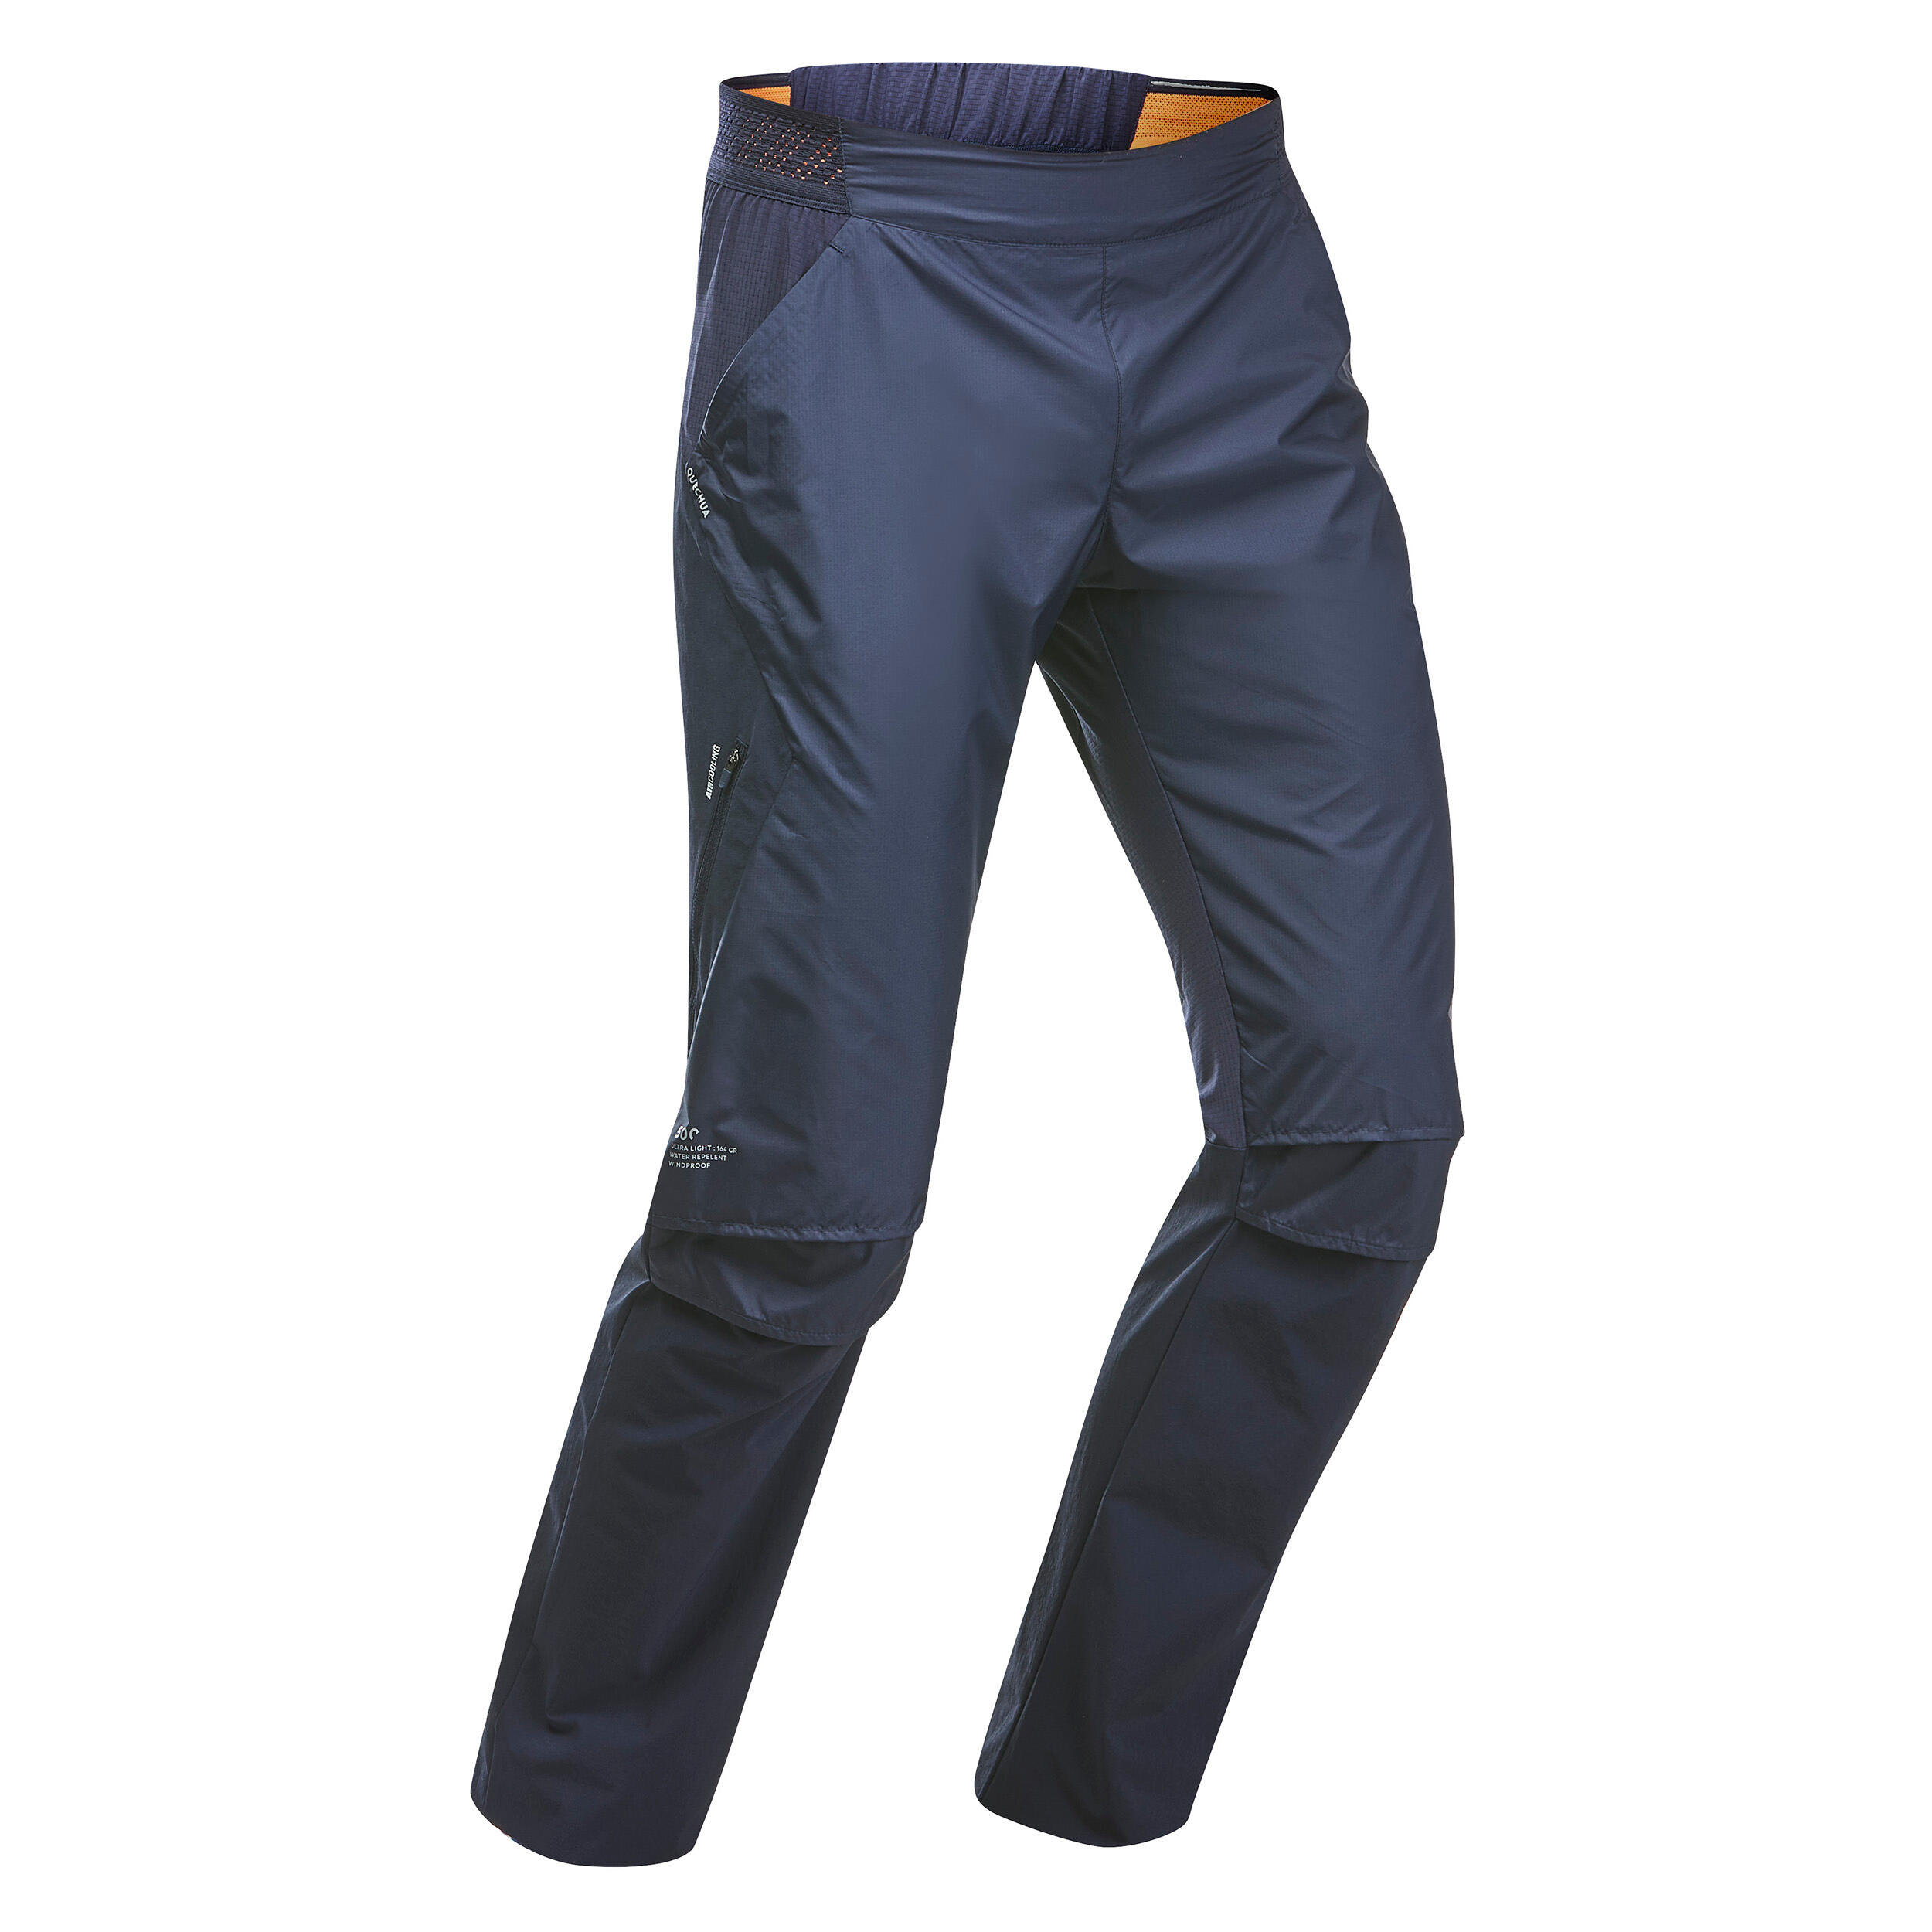 Men%20s%20Fast%20Hiking%20Trousers%20FH500